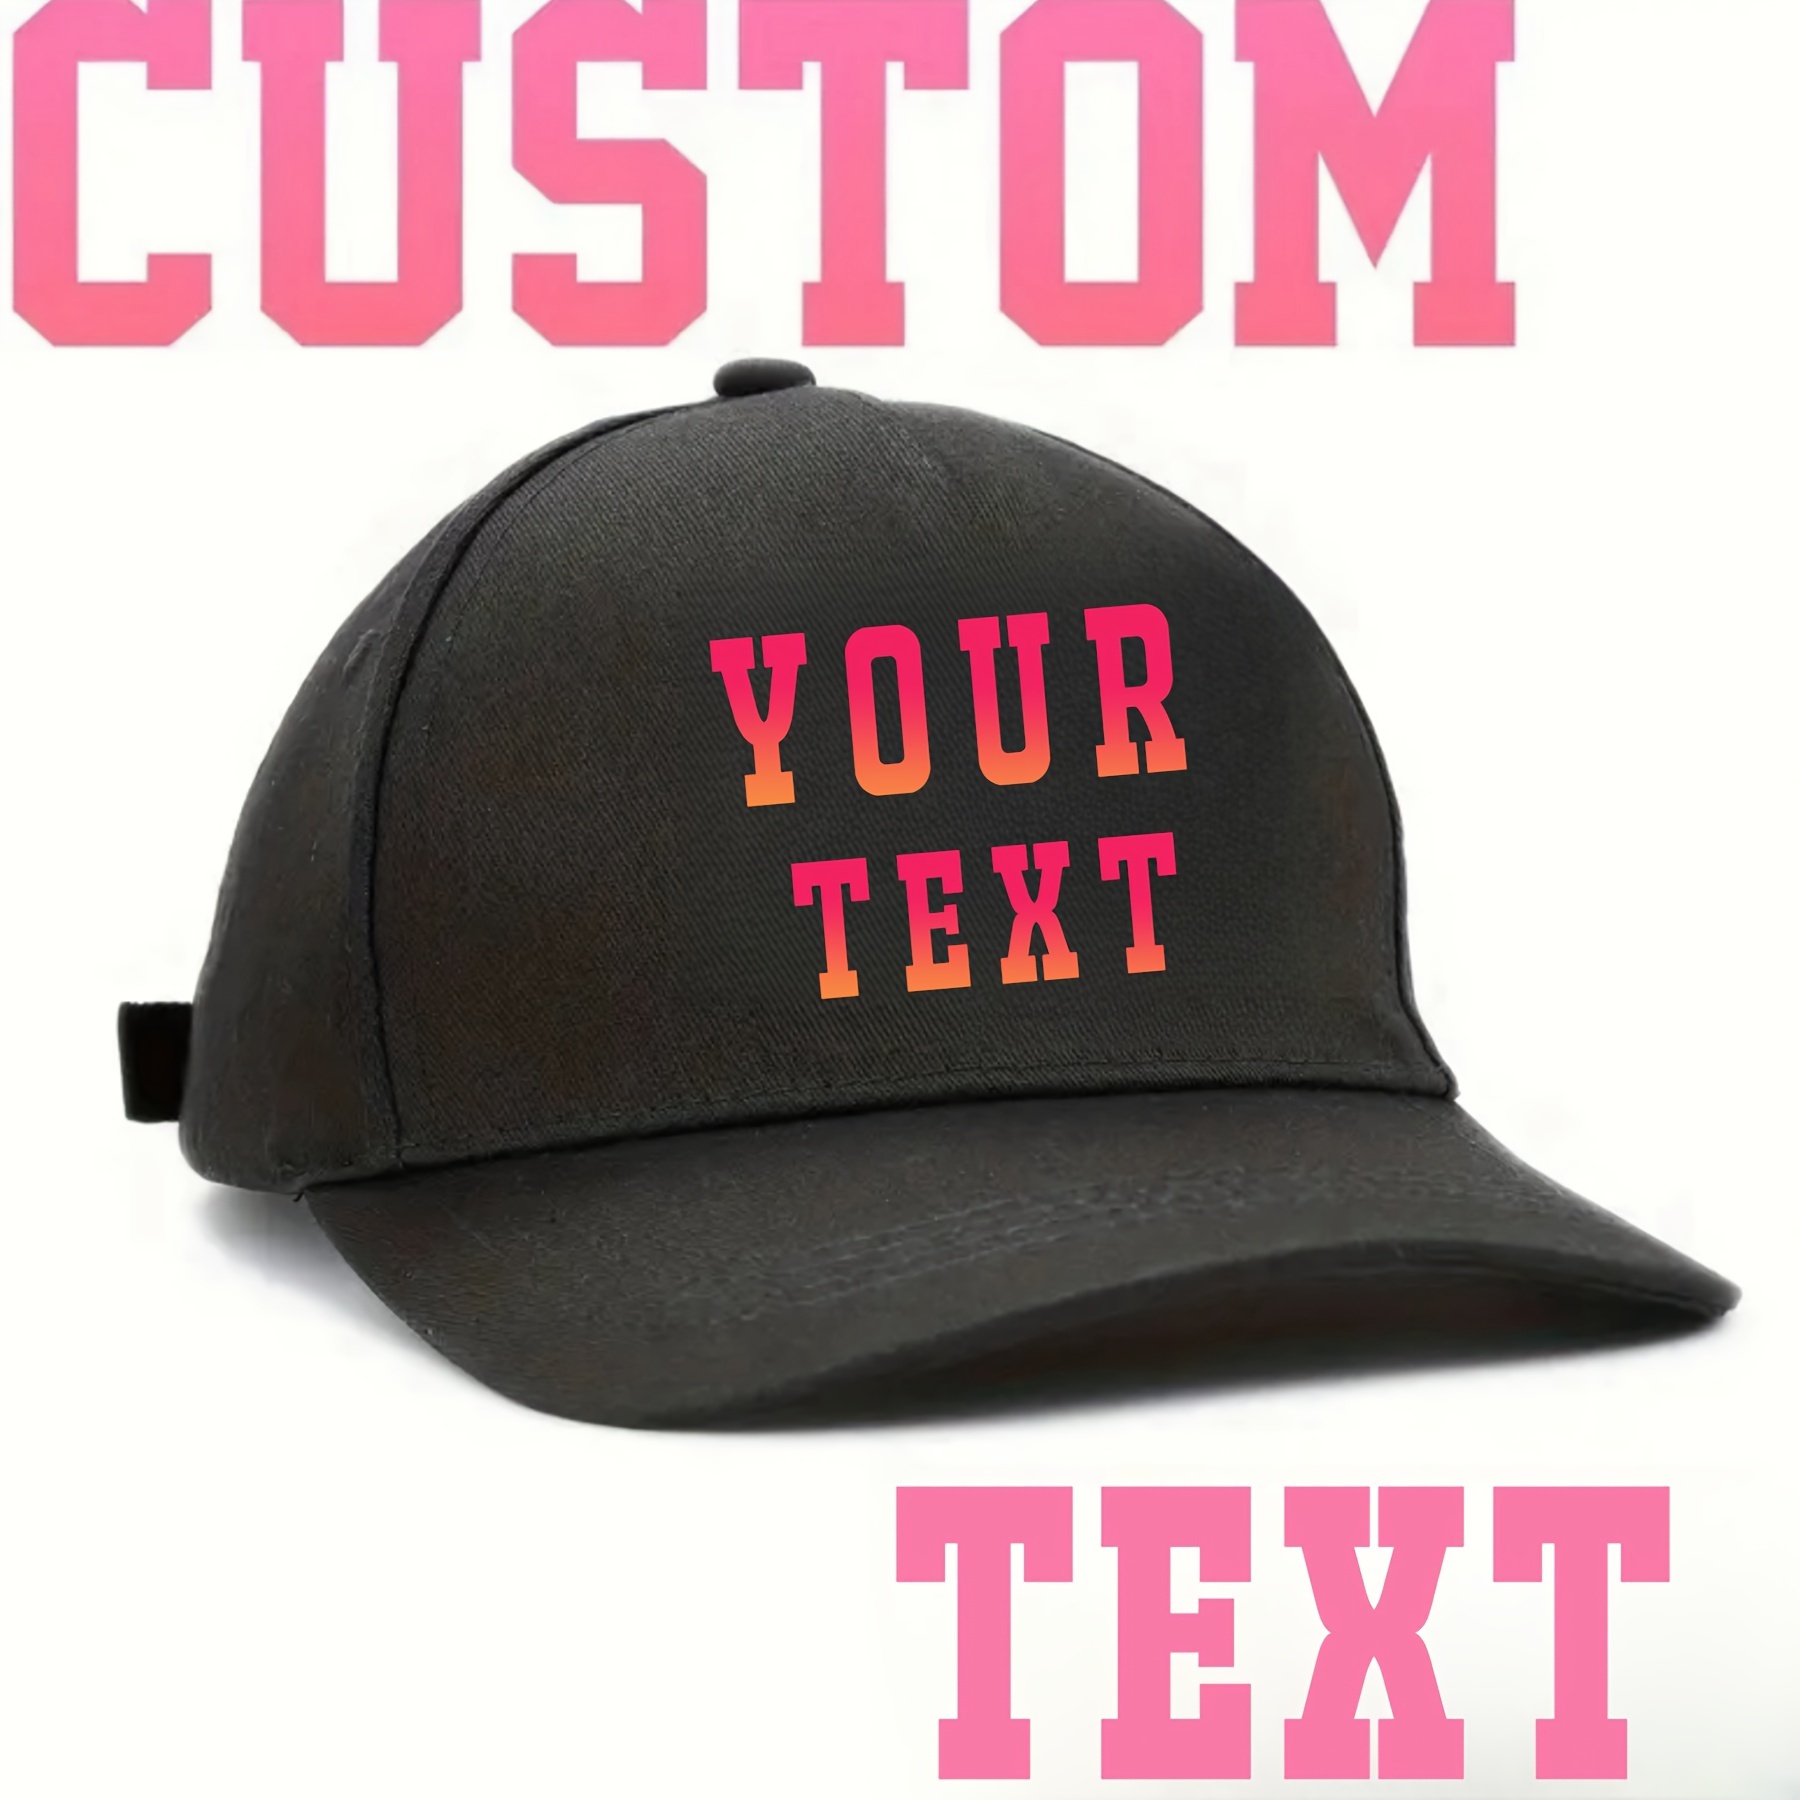 

Custom Gradient Text Personalized Baseball Cap - Breathable Cotton, Adjustable Fit For Men & Women, Fantasy Theme, Printed Design, Fashionable Sun Hat Gift